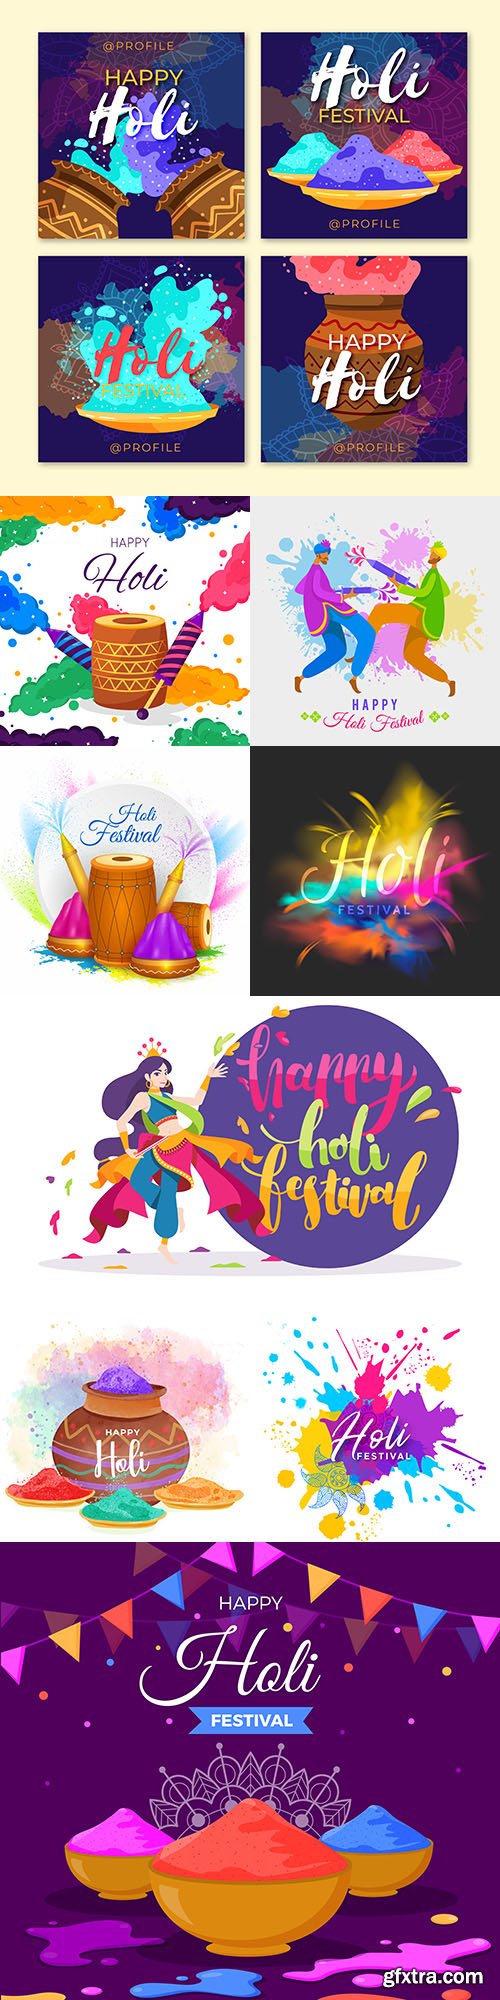 Happy holi traditional festival colorful illustrations